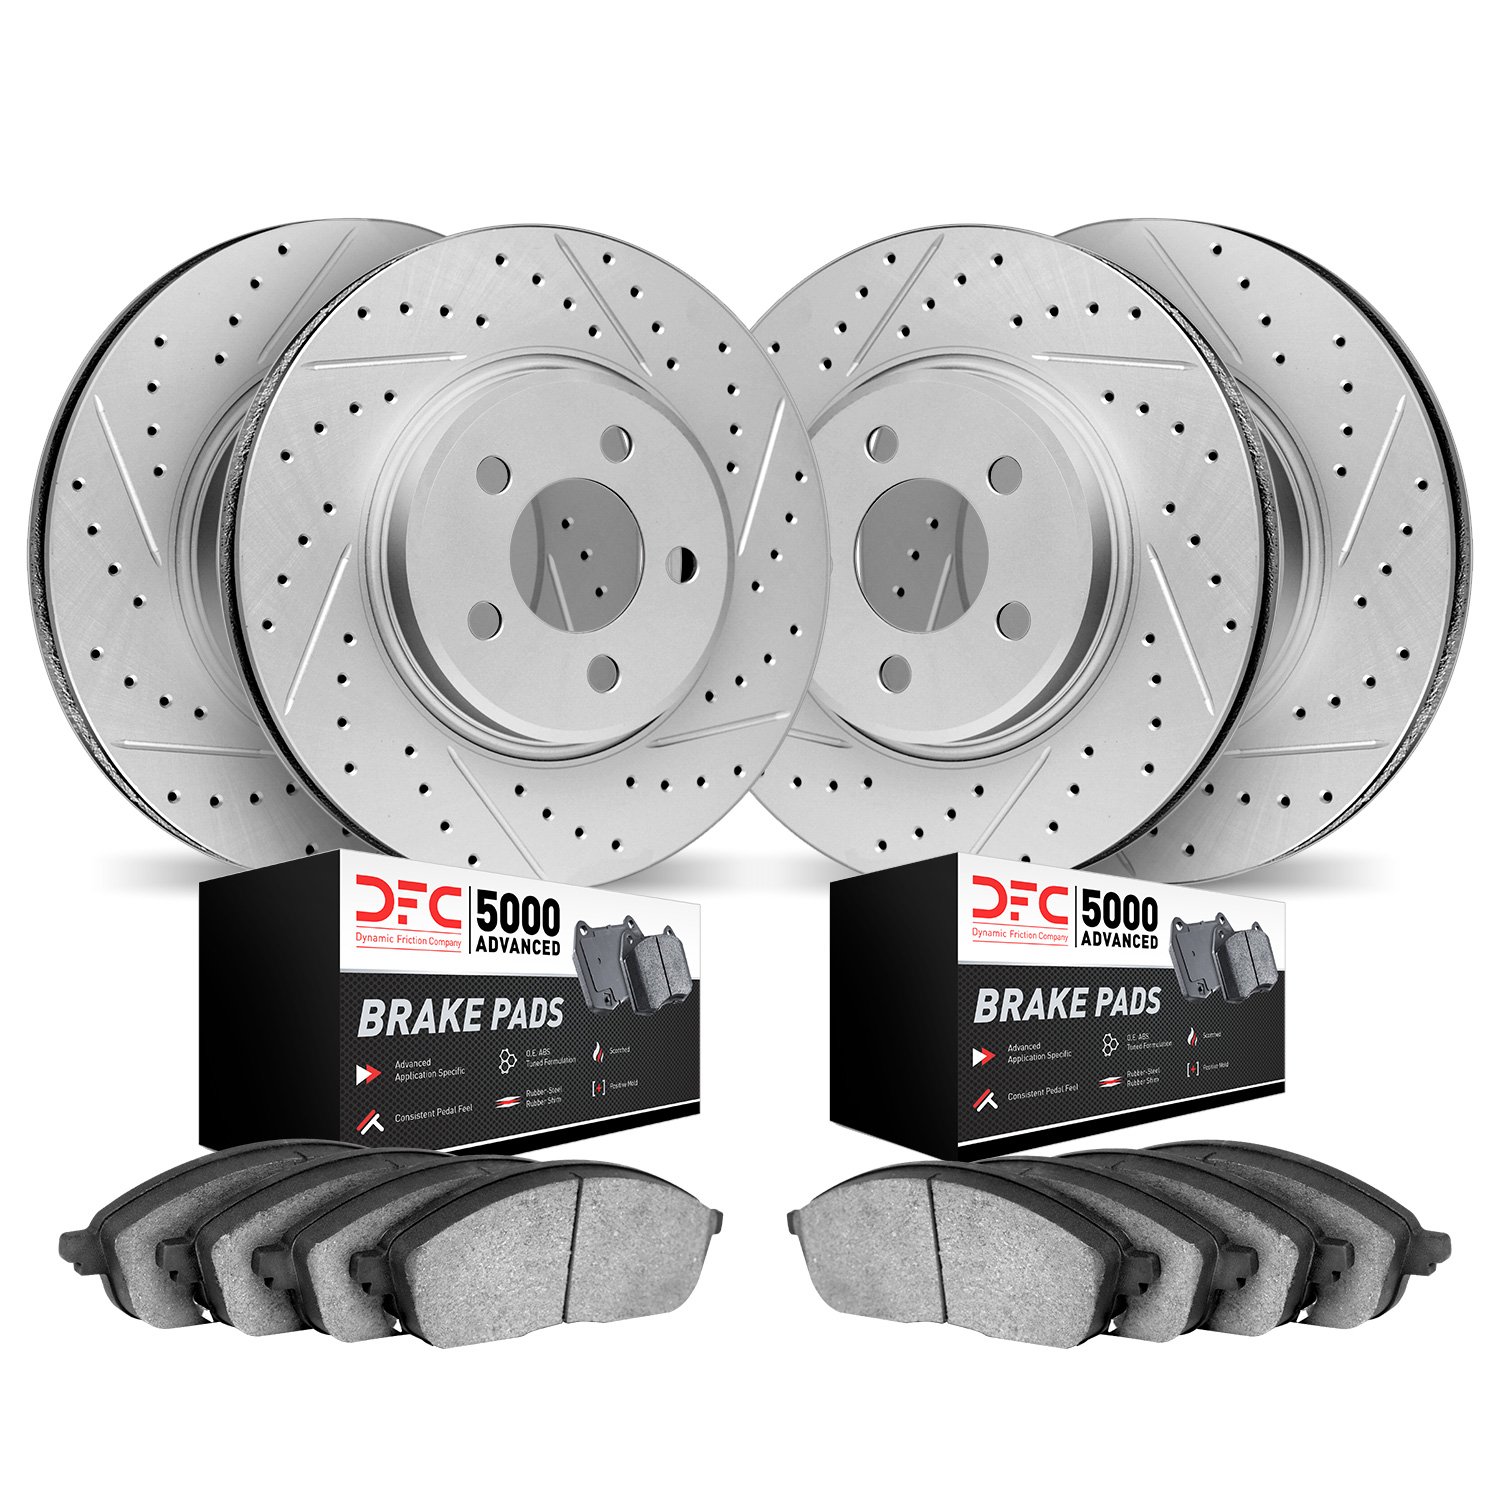 2504-54271 Geoperformance Drilled/Slotted Rotors w/5000 Advanced Brake Pads Kit, 2004-2006 Ford/Lincoln/Mercury/Mazda, Position: